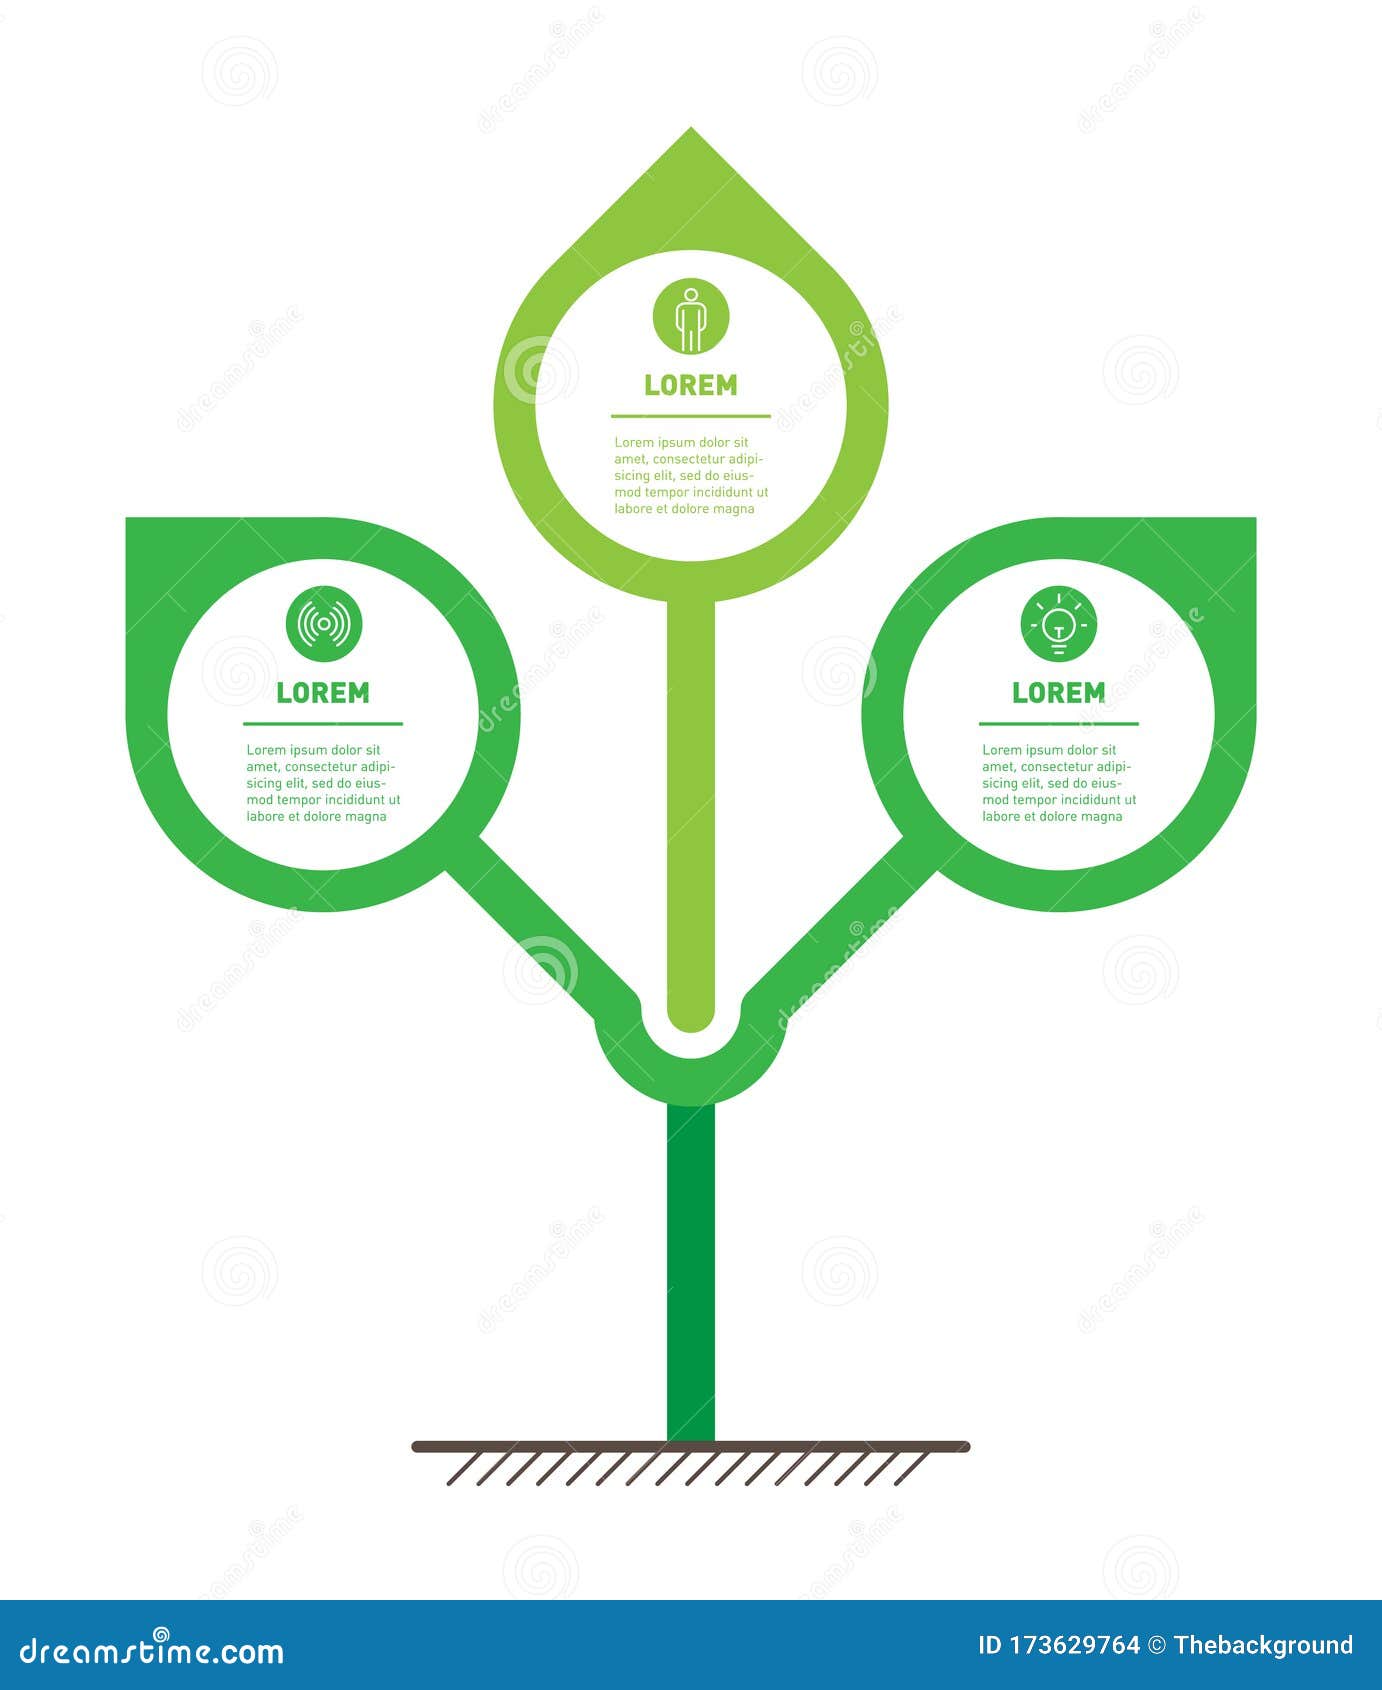 infographics or timeline with 3 options.  stylized tree with leafs. development of the eco business or green technology. the